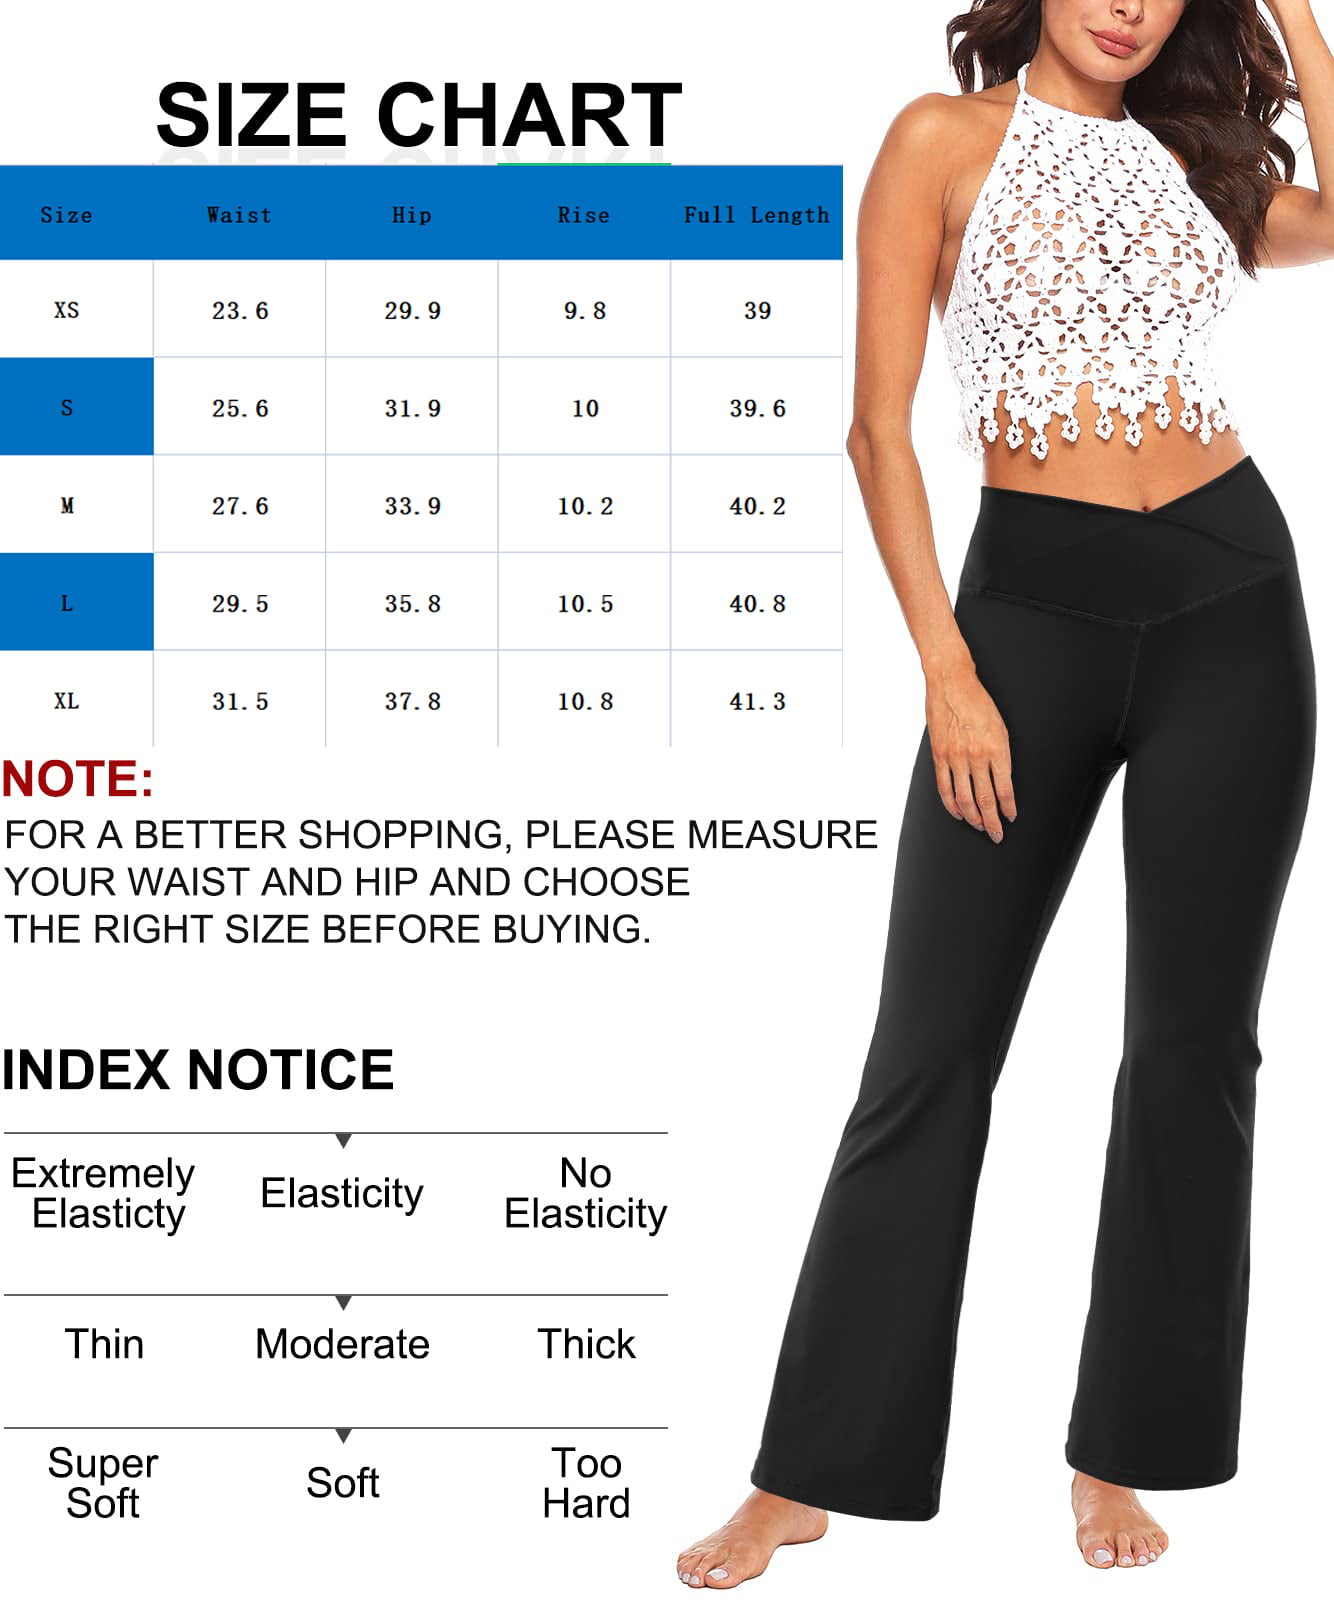 Aopwsrlyi Bootcut Yoga Pants for Women,Crossover High Waisted Pants for  Women Tummy Control Yoga Flare Pants